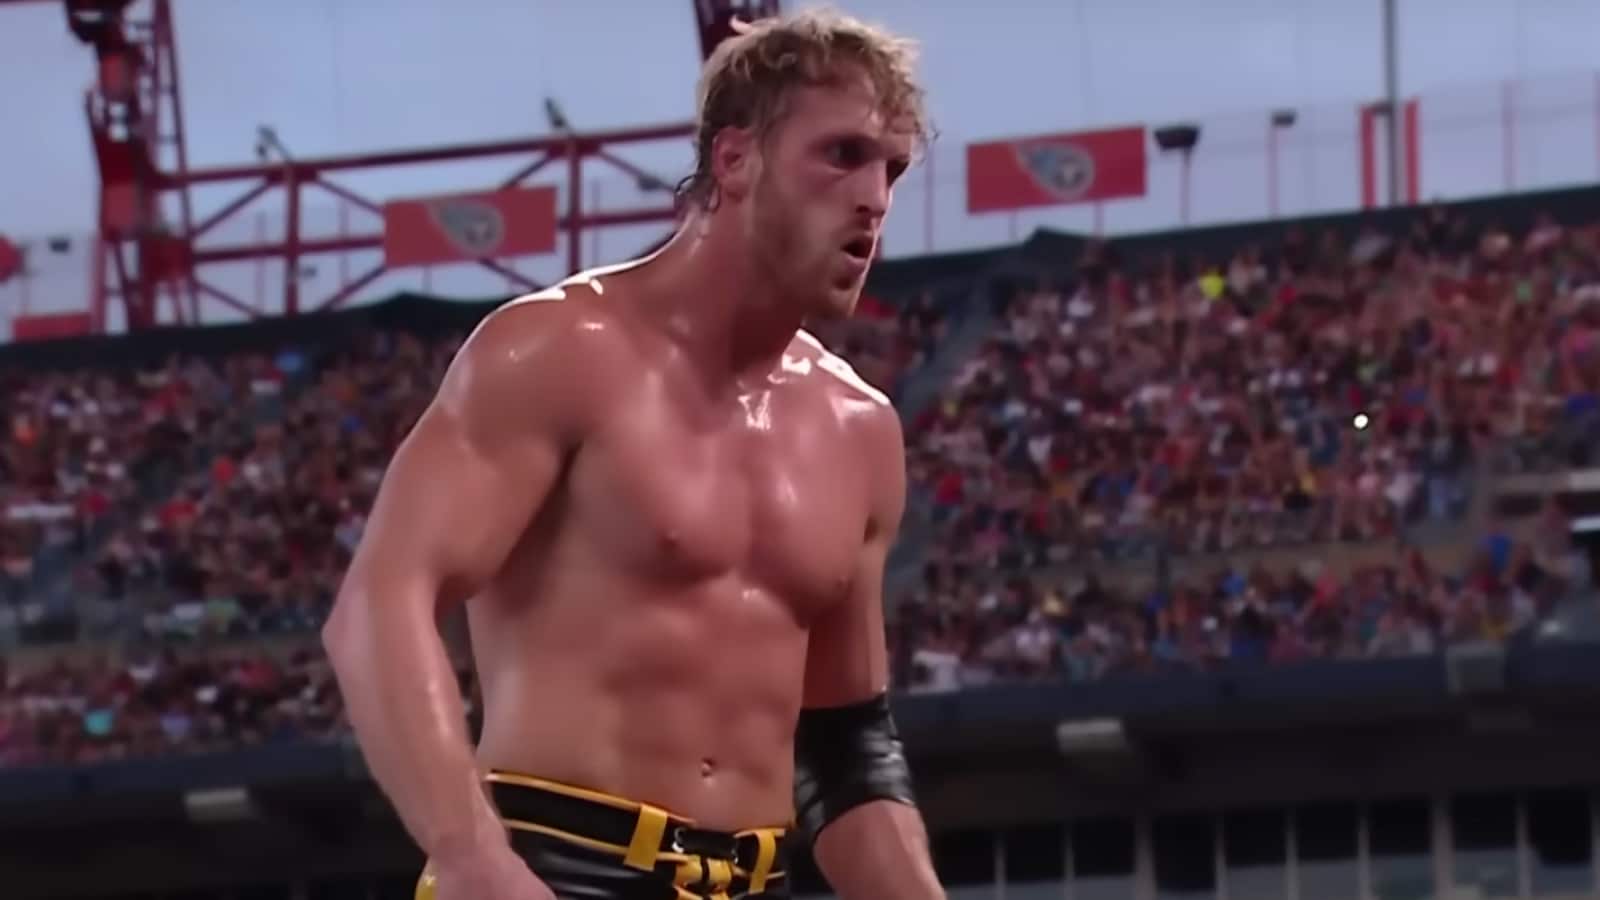 An image of Logan Paul competing in WWE Summerslam 2022